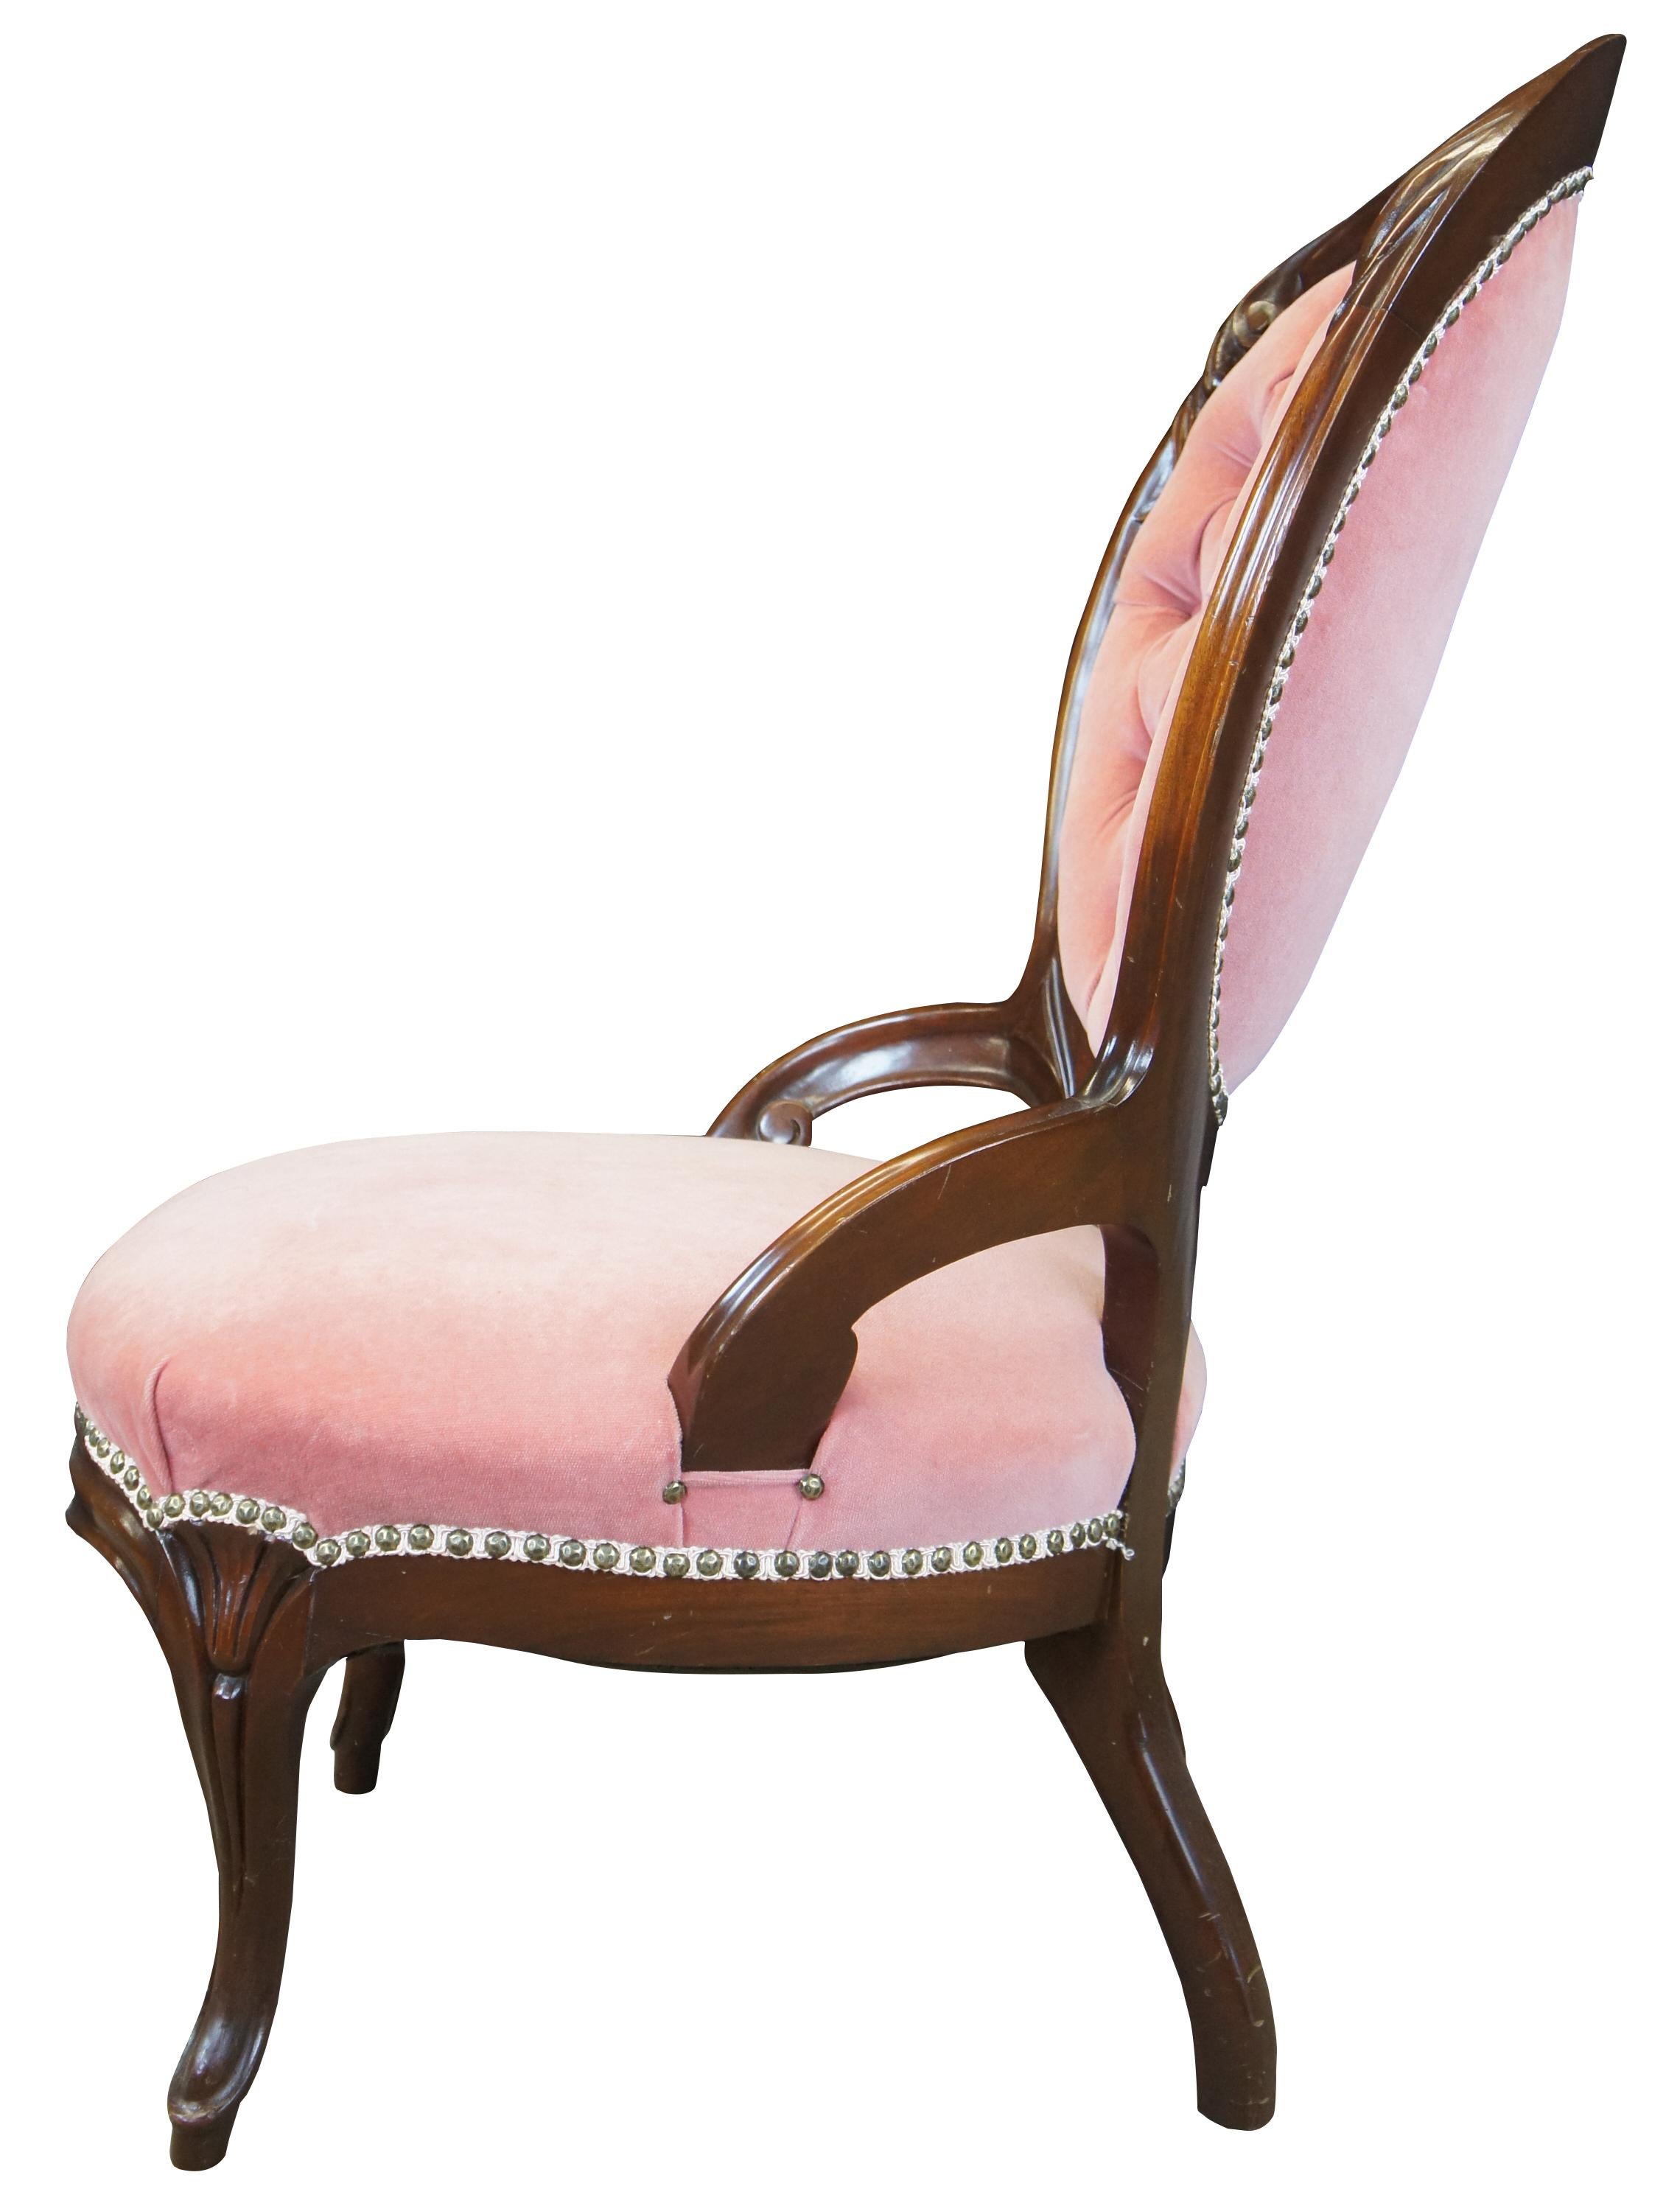 Antique Victorian side accent vanity or parlor chair. Made of walnut featuring serpentine form with pink velvet upholstery, tufted balloon back, and nailhead trim.
     